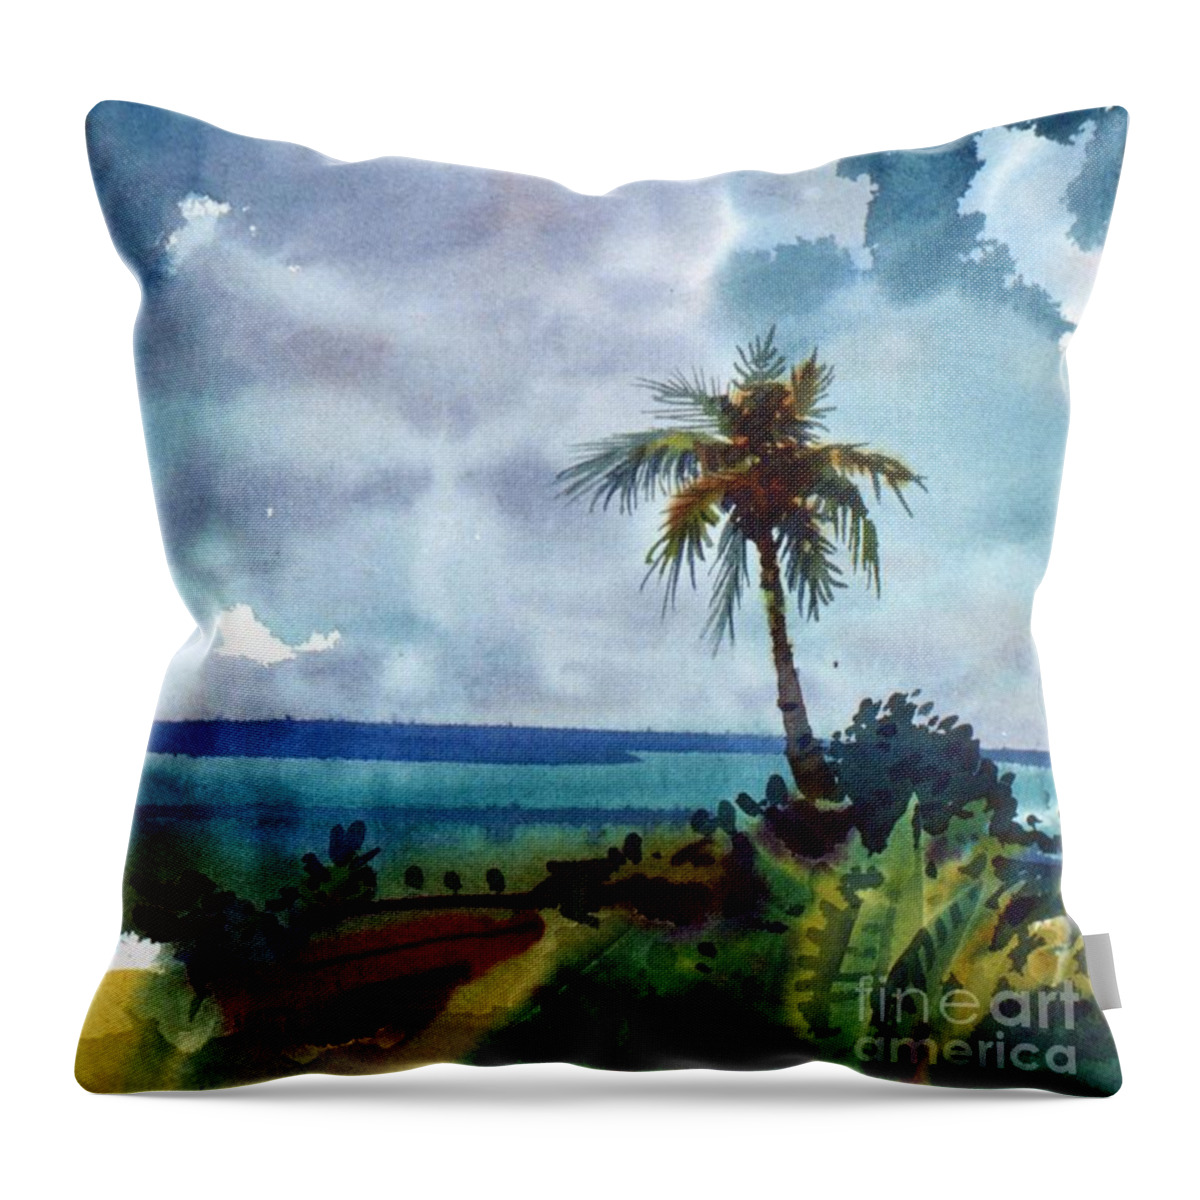 Tropic Throw Pillow featuring the painting Tropical Afternoon by Donald Maier